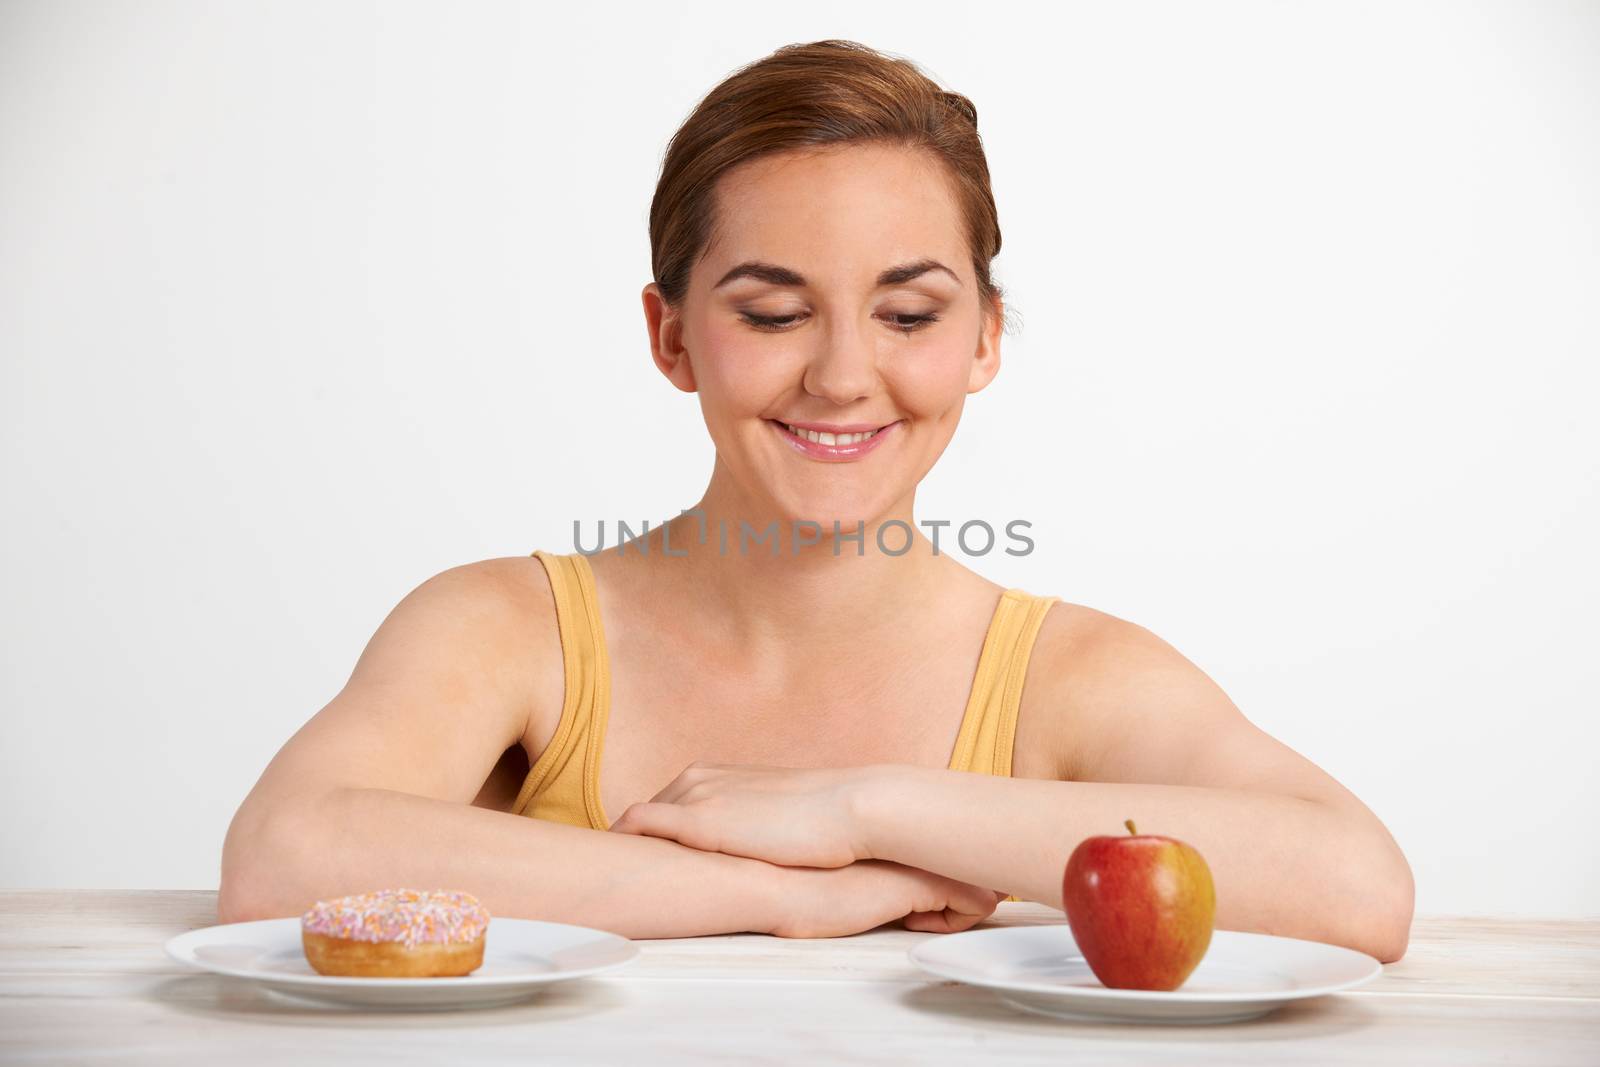 Young Woman Choosing Between Doughnut And Cake For Snack by HWS